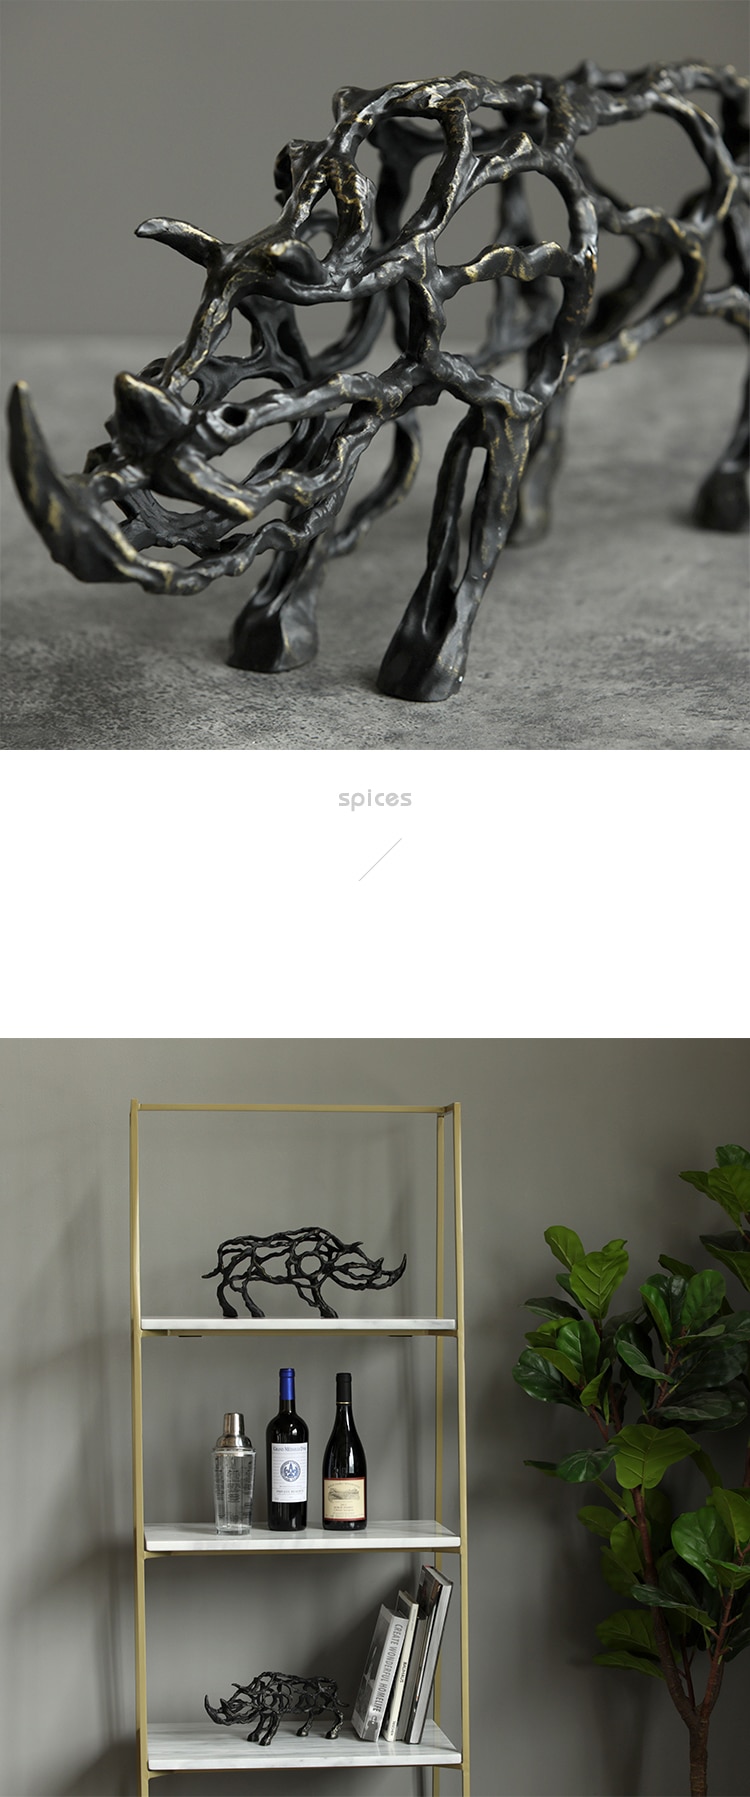 Modern Abstract Rhino Abstract Ornament Metal Frame Statue Home Decoration Crafts Room Objects Office Figurines Wedding Gifts